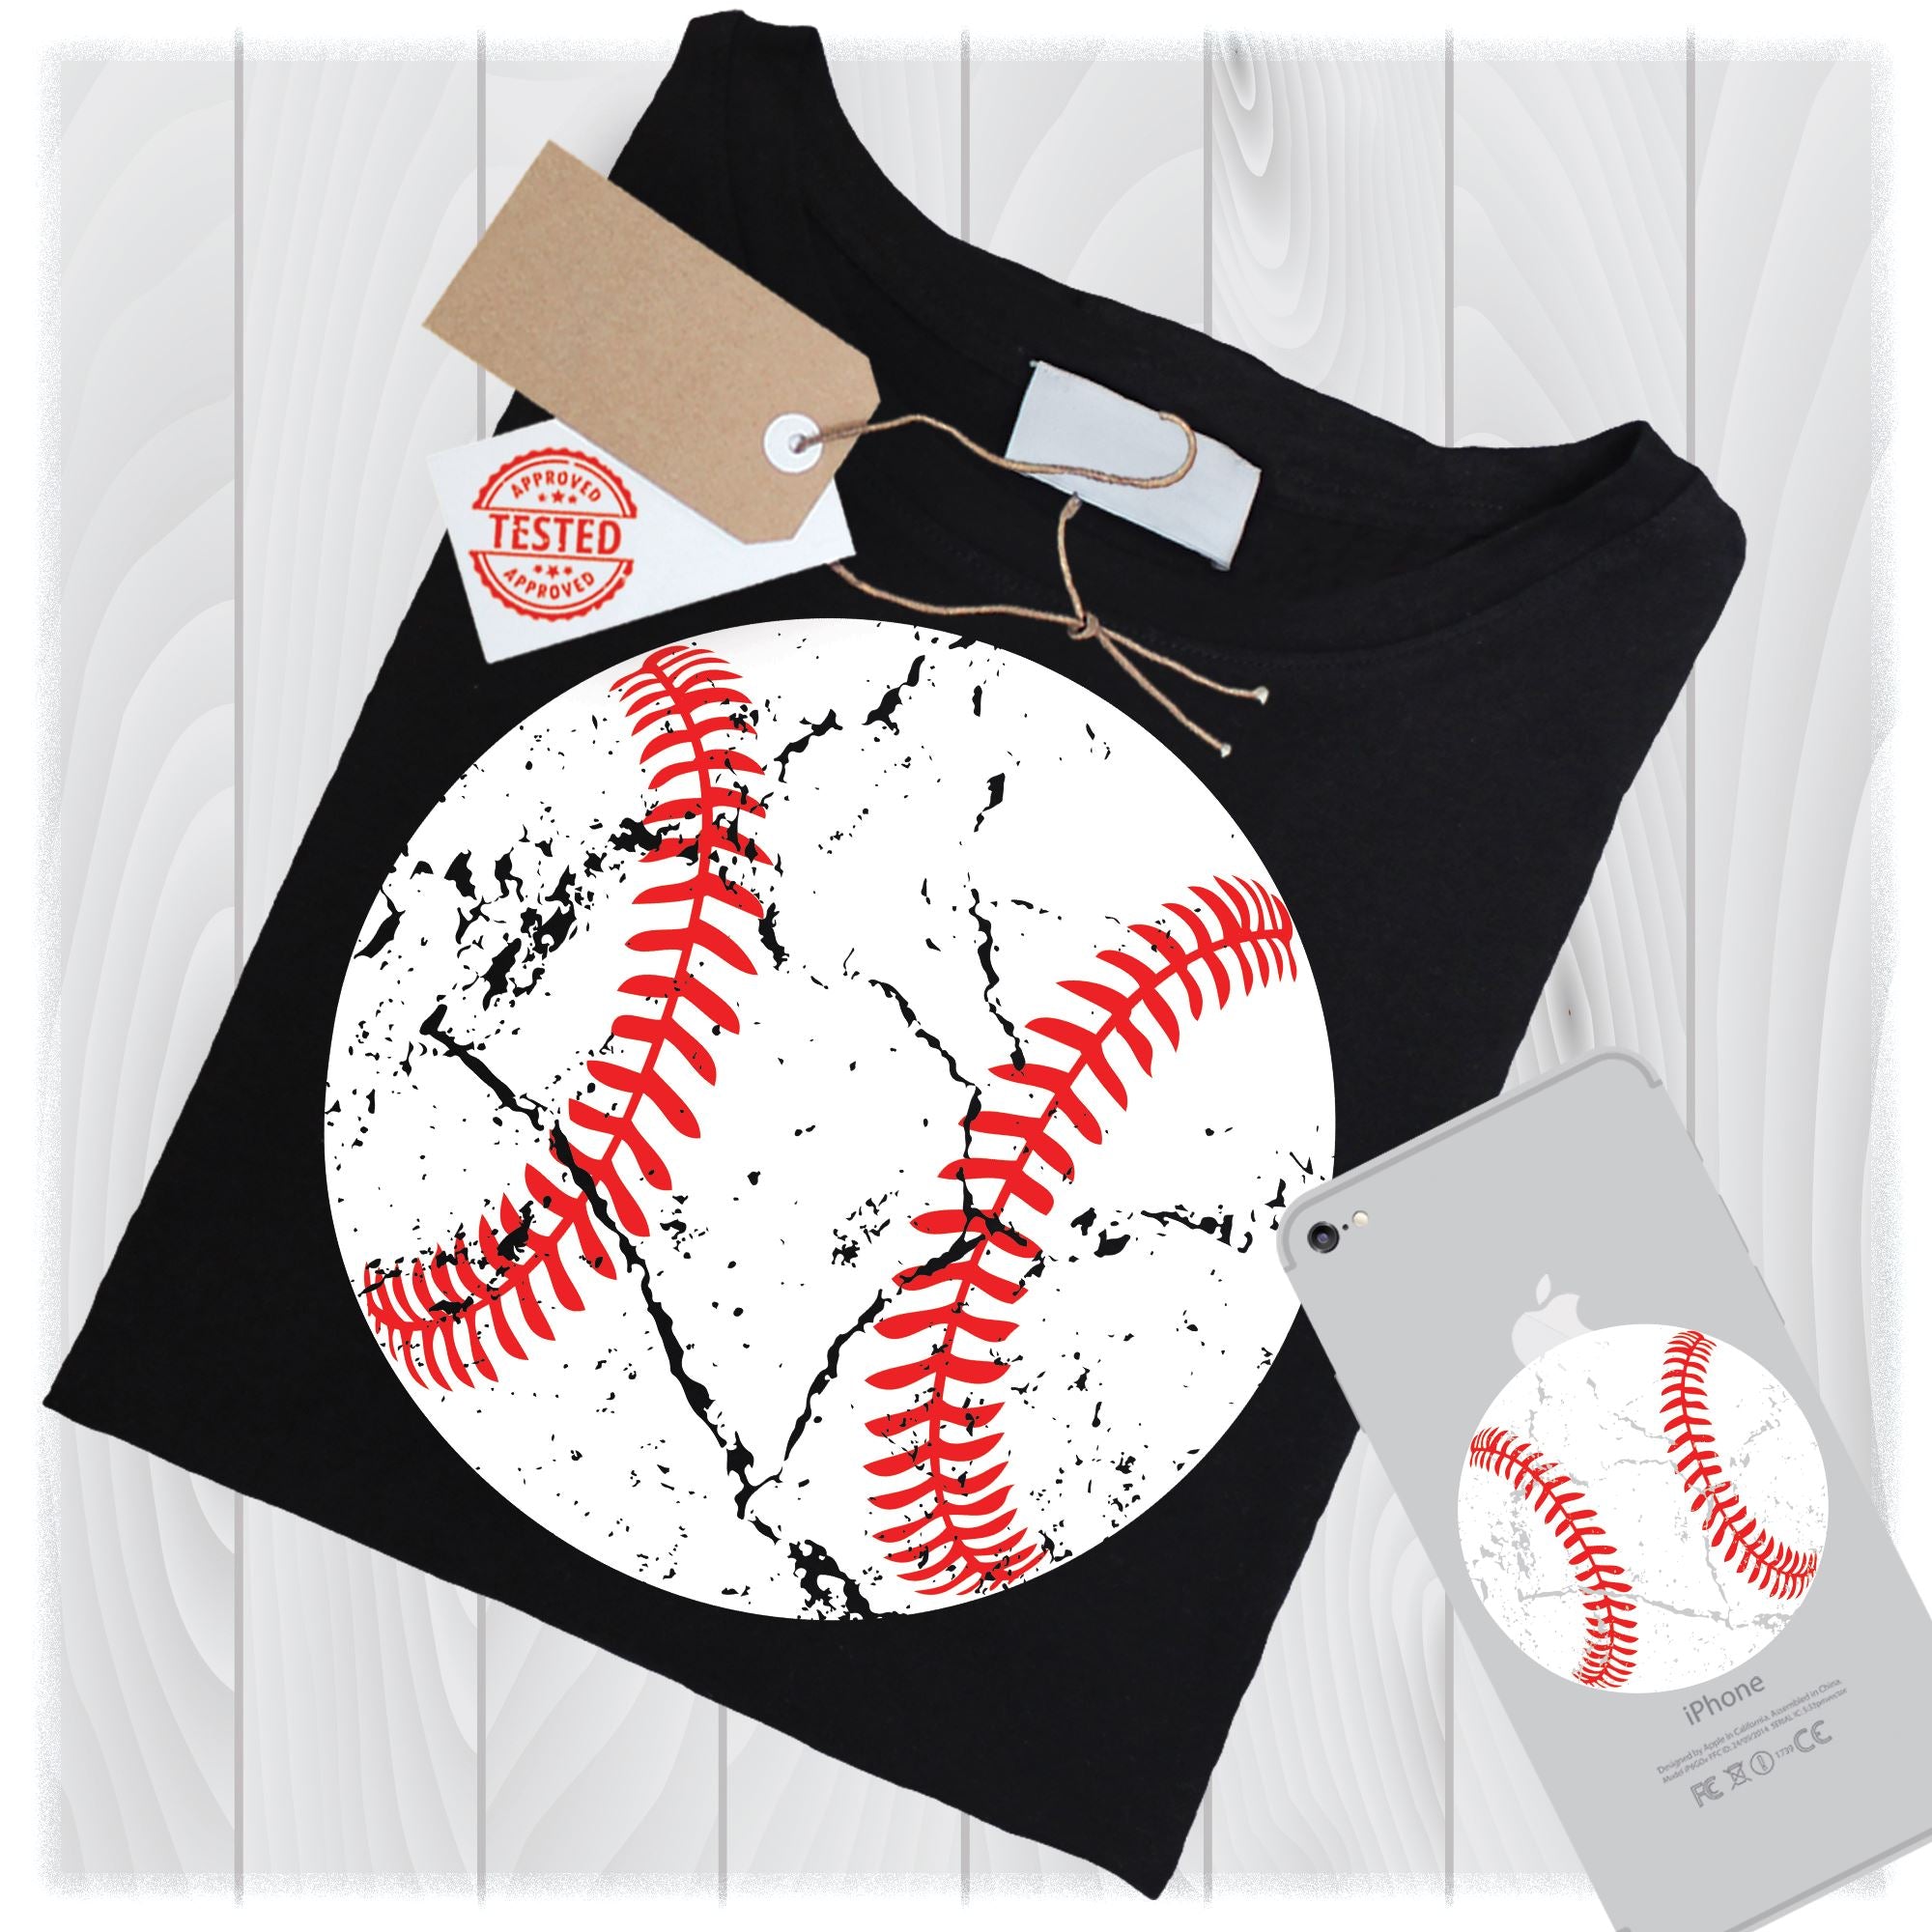 Download Distressed Baseball Svg Files For Cricut Designs Svg Cut Files Silhouette Svg Cutting File Cricut Svg Files Dxf Files Grunge Svg Designs So Fontsy